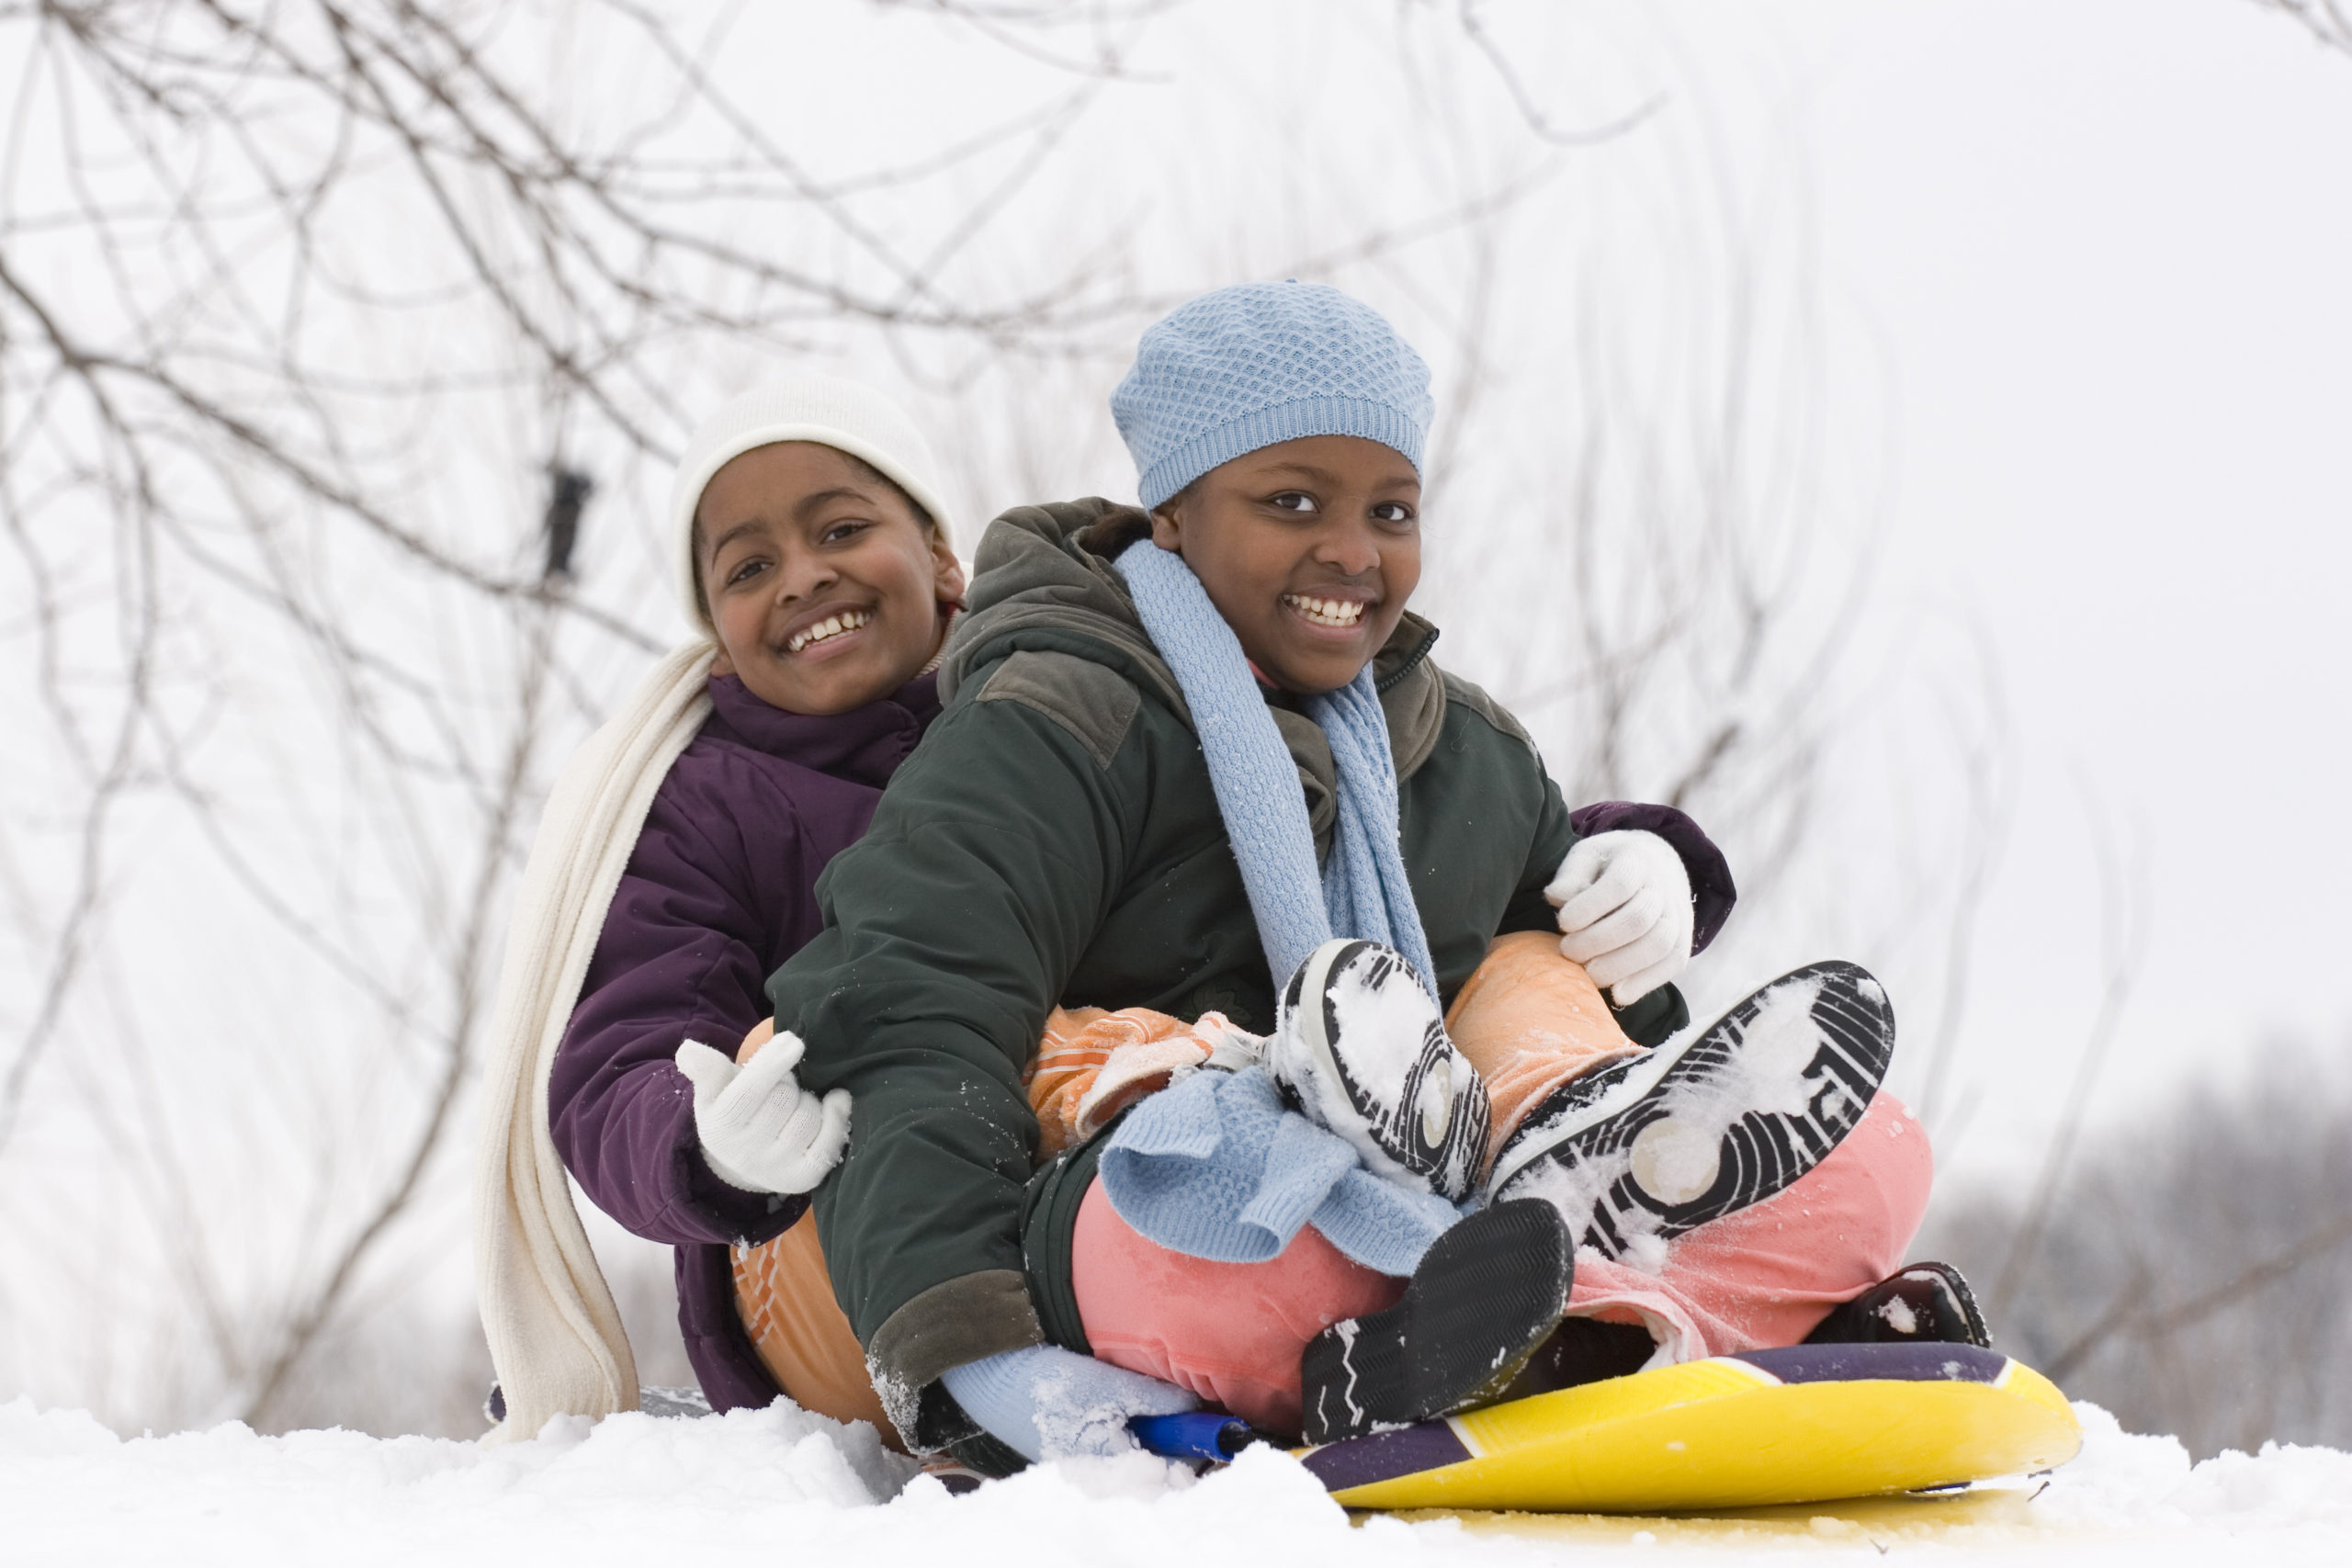 Two children smiling on a sled in the snow